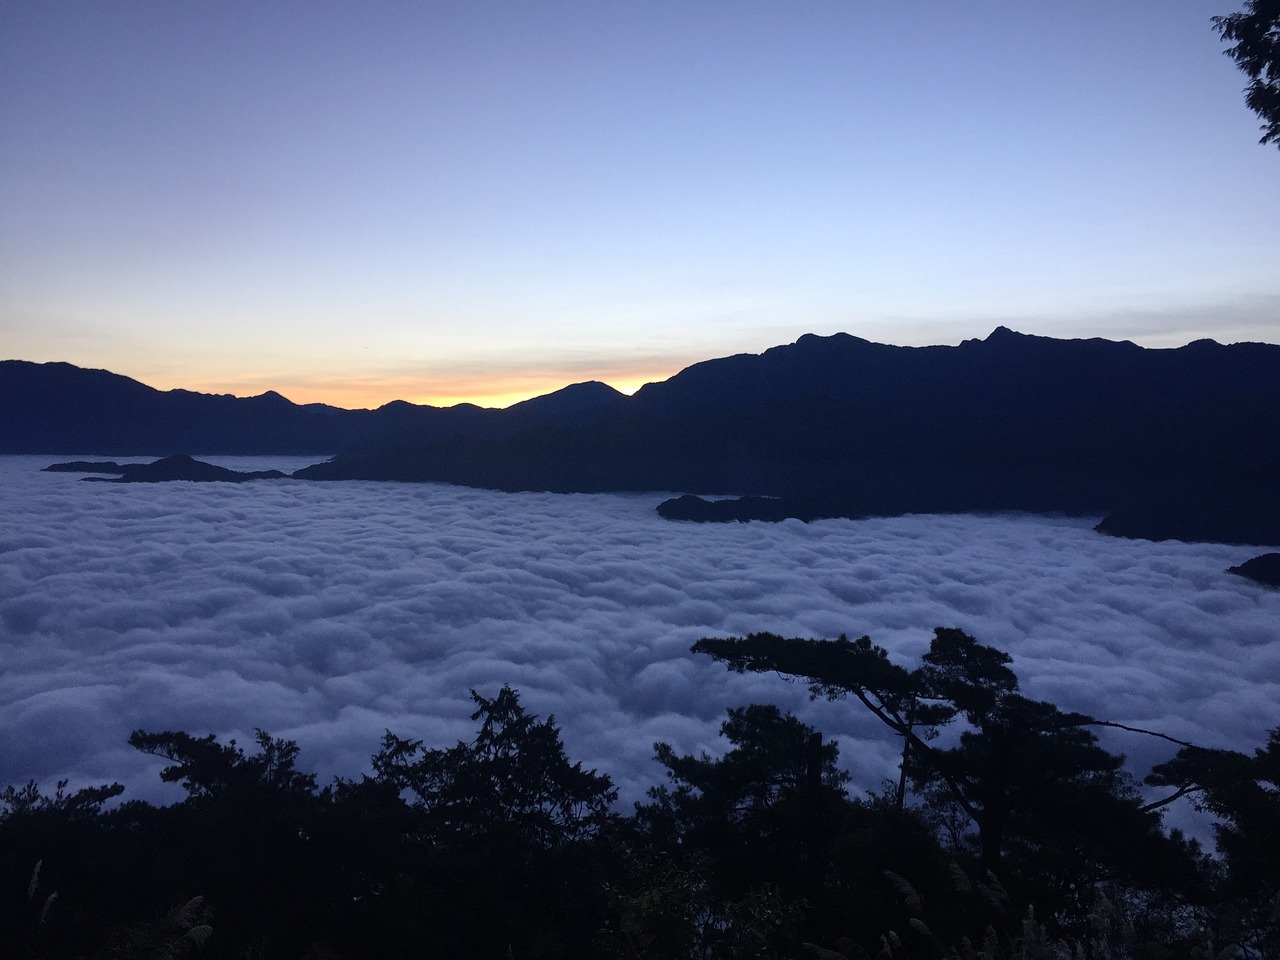 Culinary Delights and Cultural Wonders: A 3-Day Alishan Adventure